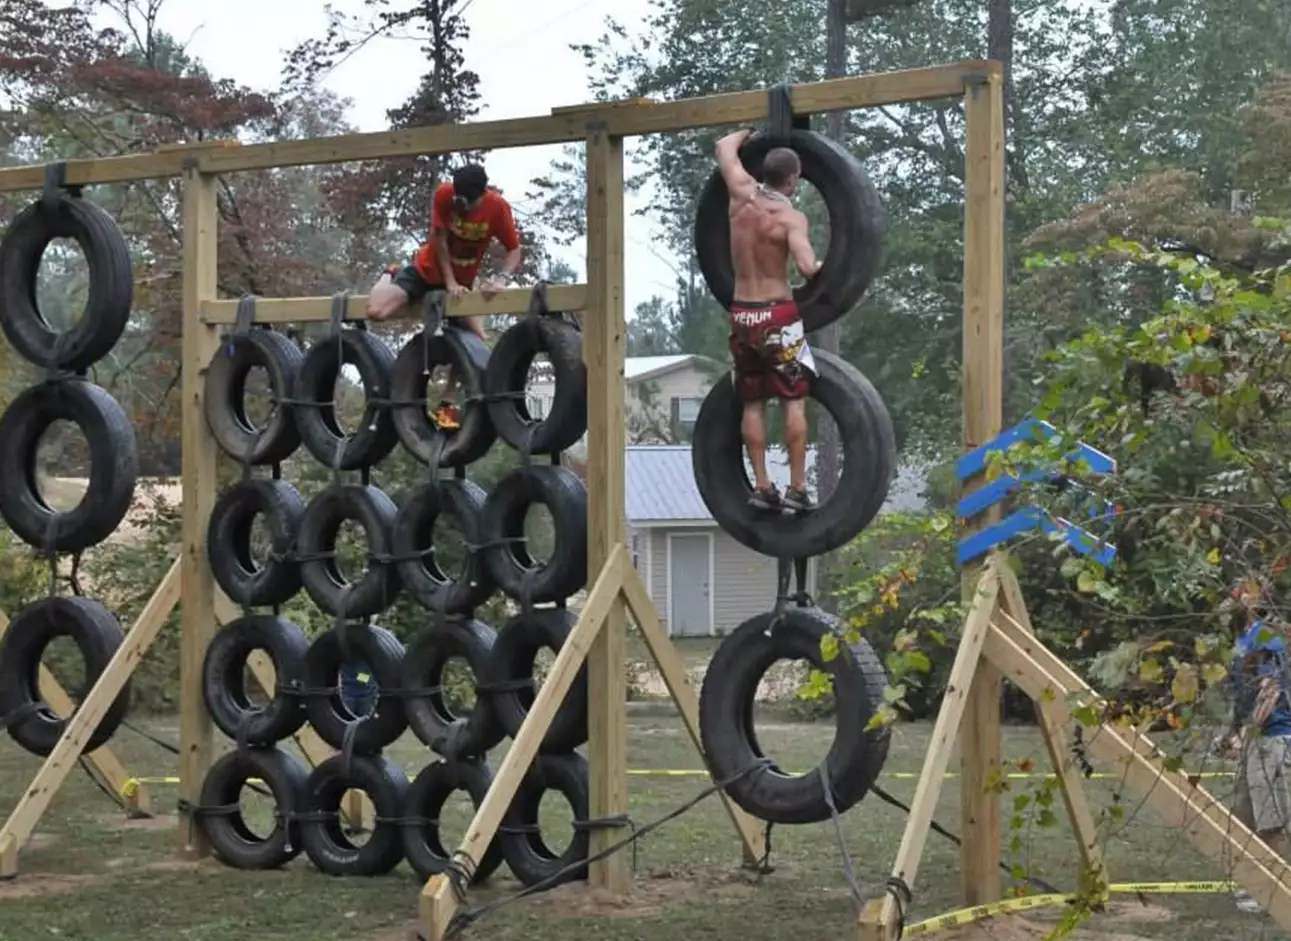 Obstacle Course - Test your skills on exciting challenges